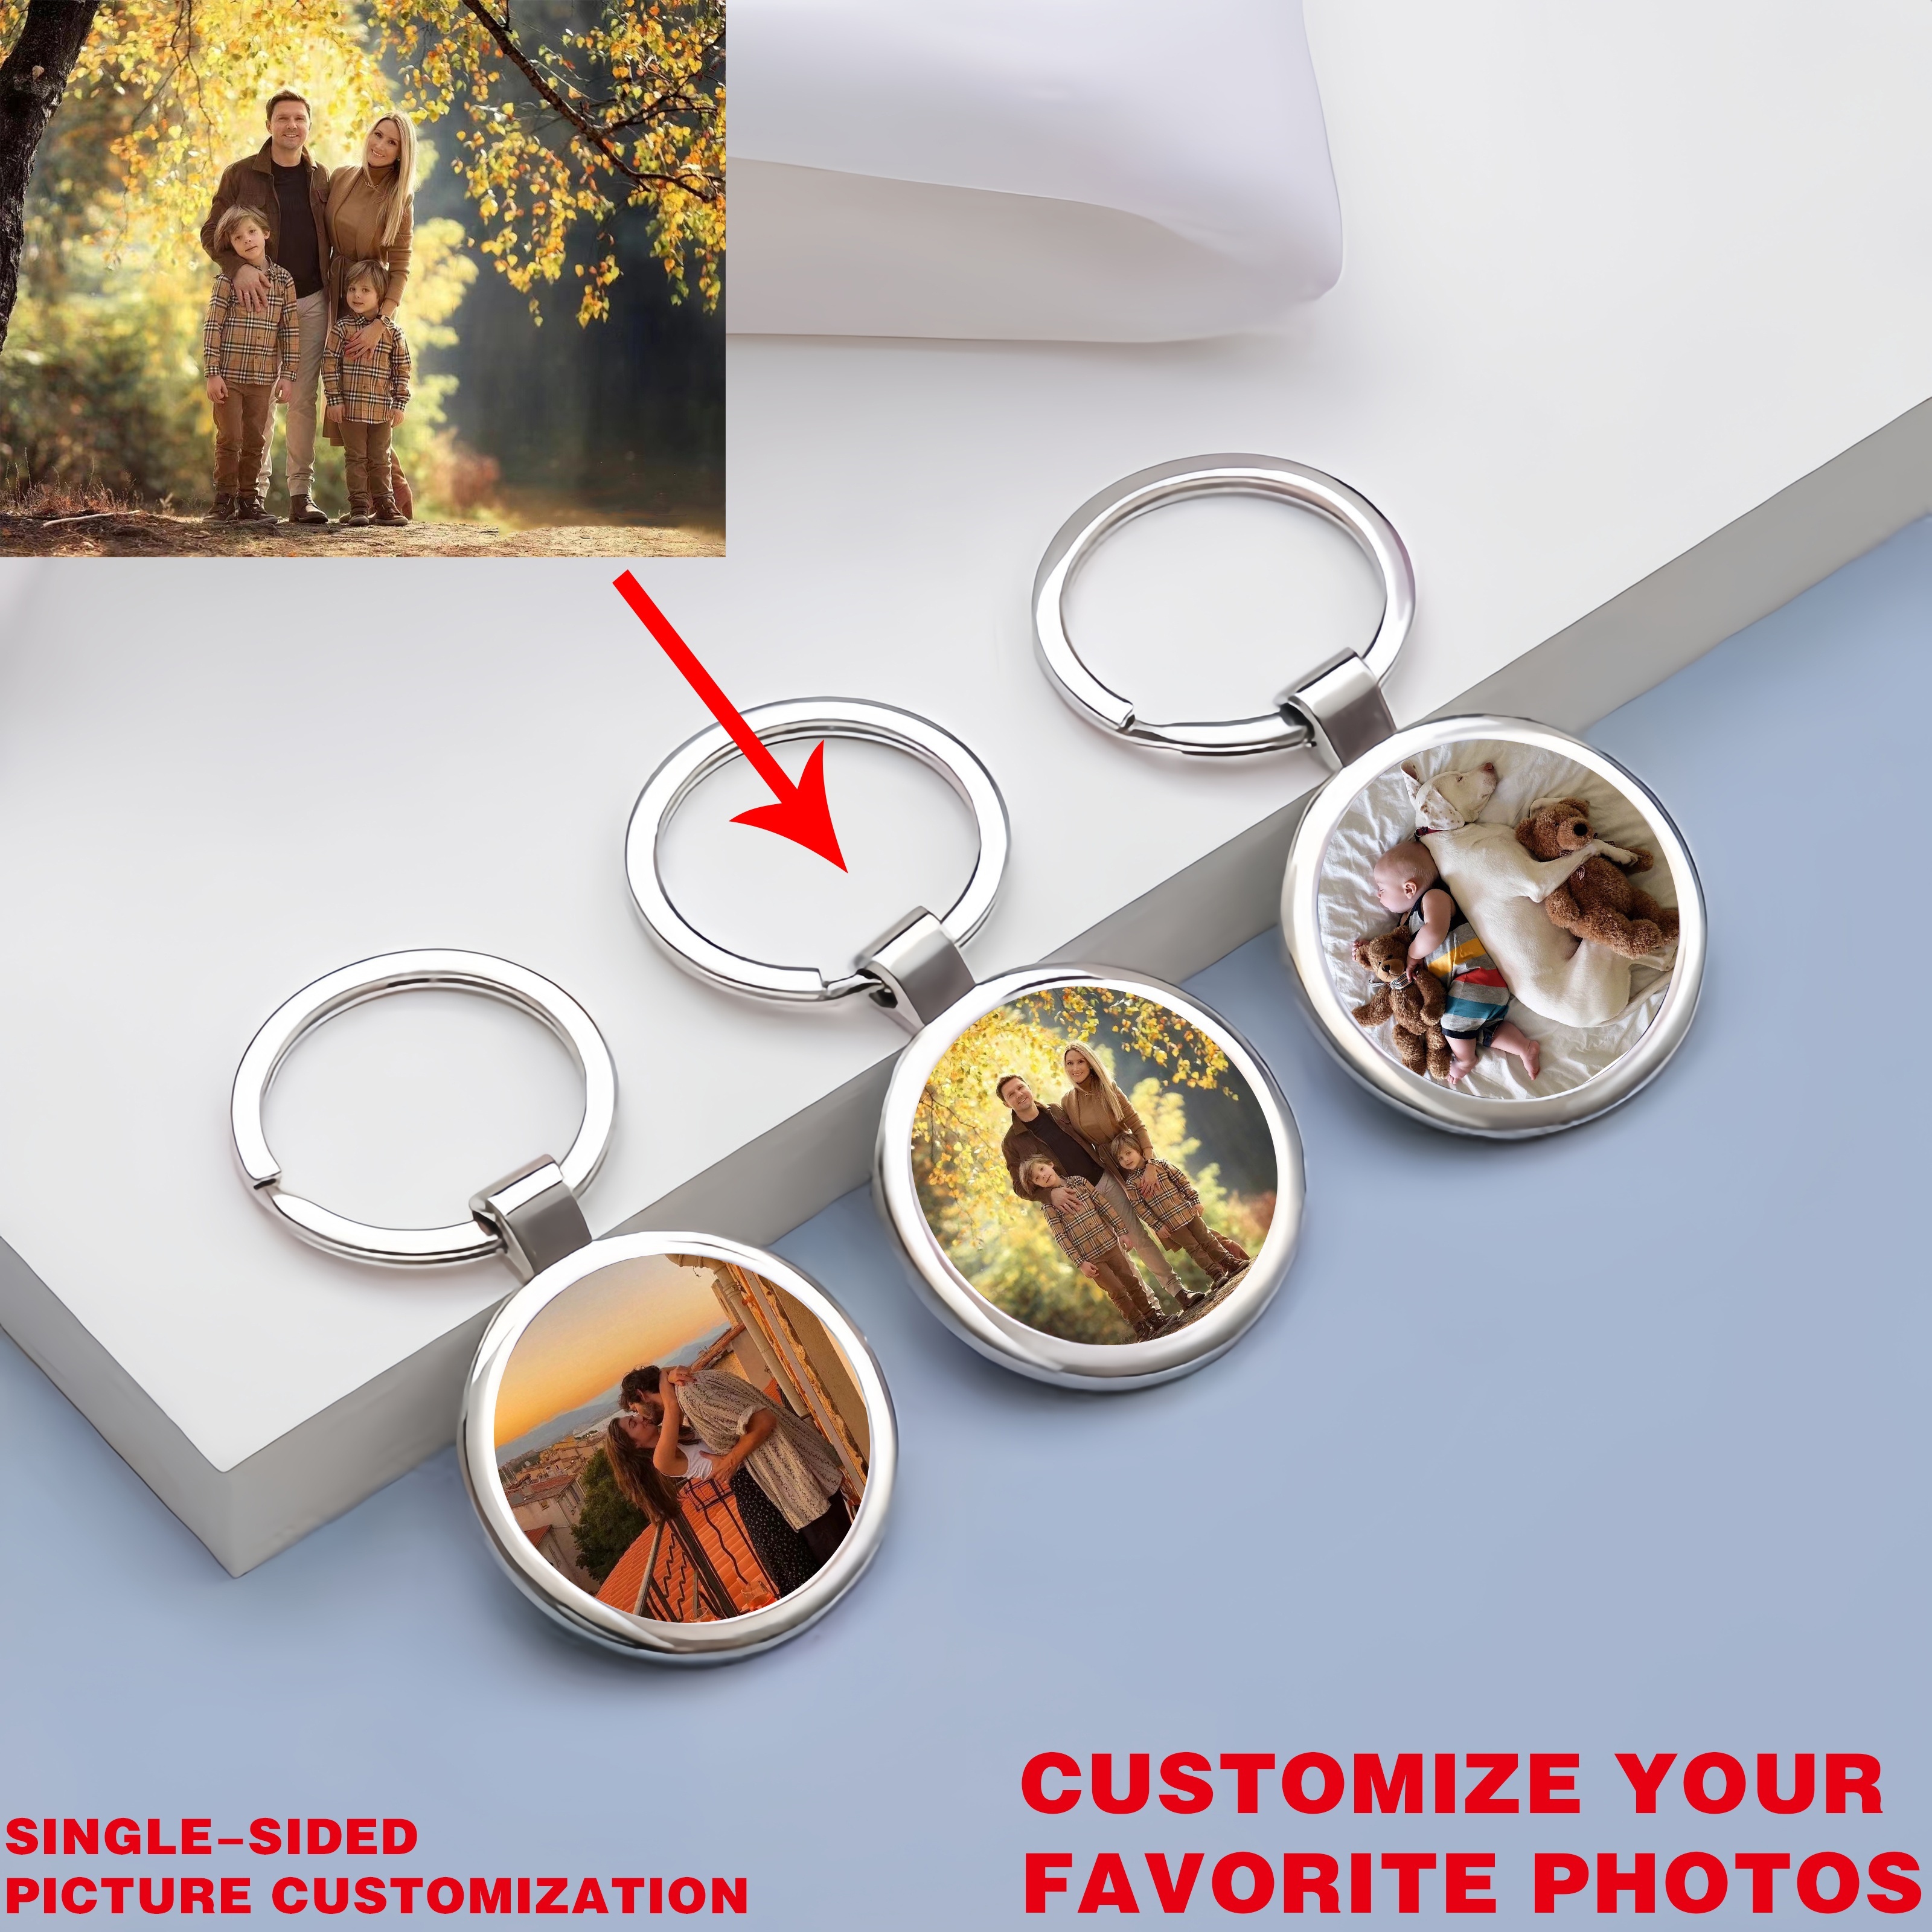 

Custom Men's Photo Keychain - Personalized Metal Key Ring For Family, Pets, Friends & Couples - Unique Gift Idea Keychain Accessories Men